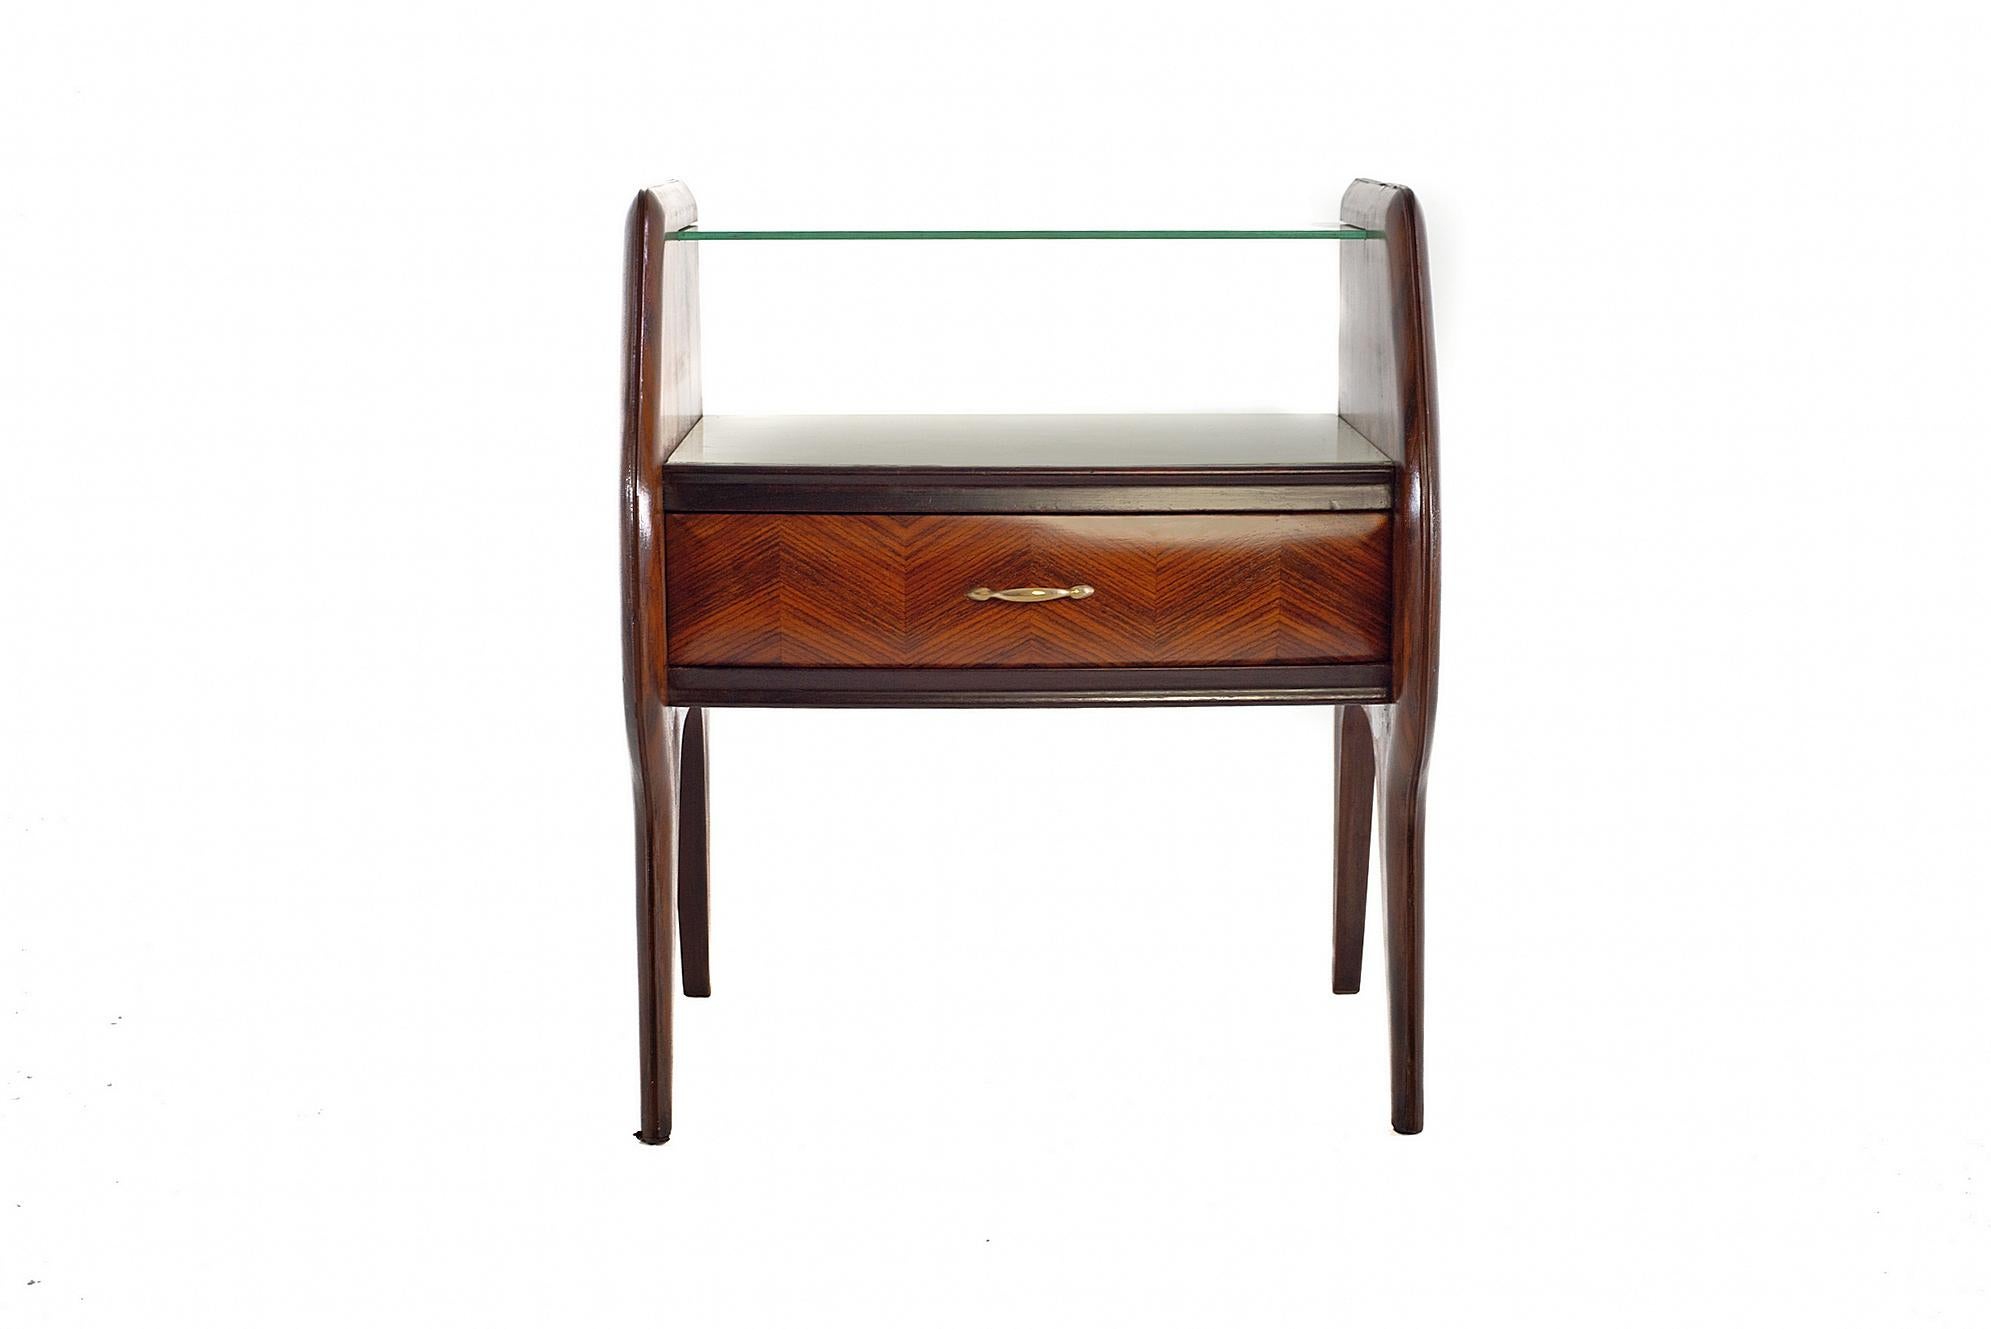 A pair of handmade nightstands by Vittorio Dassi. Each nightstand has a pair of doors with an intricate zigzag design, glass shelf and details in brass. In excellent restored condition.